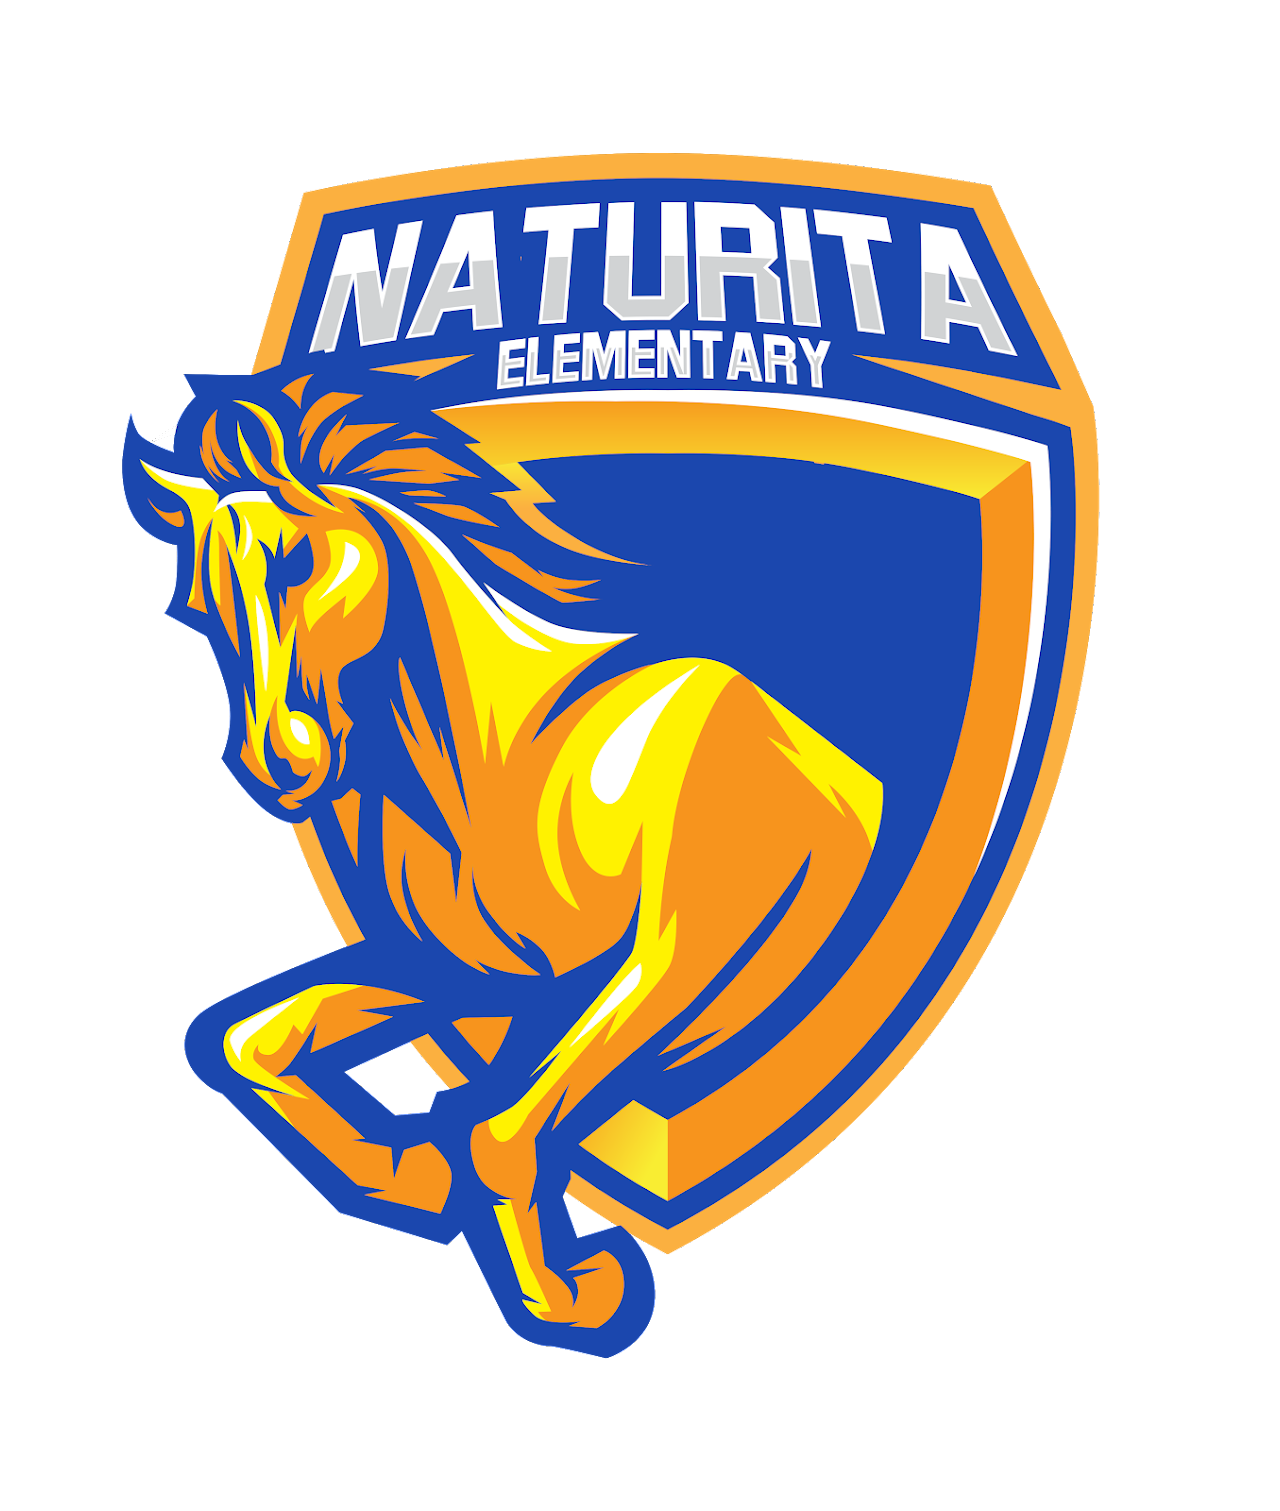 naturita elementary with a blue and gold horse